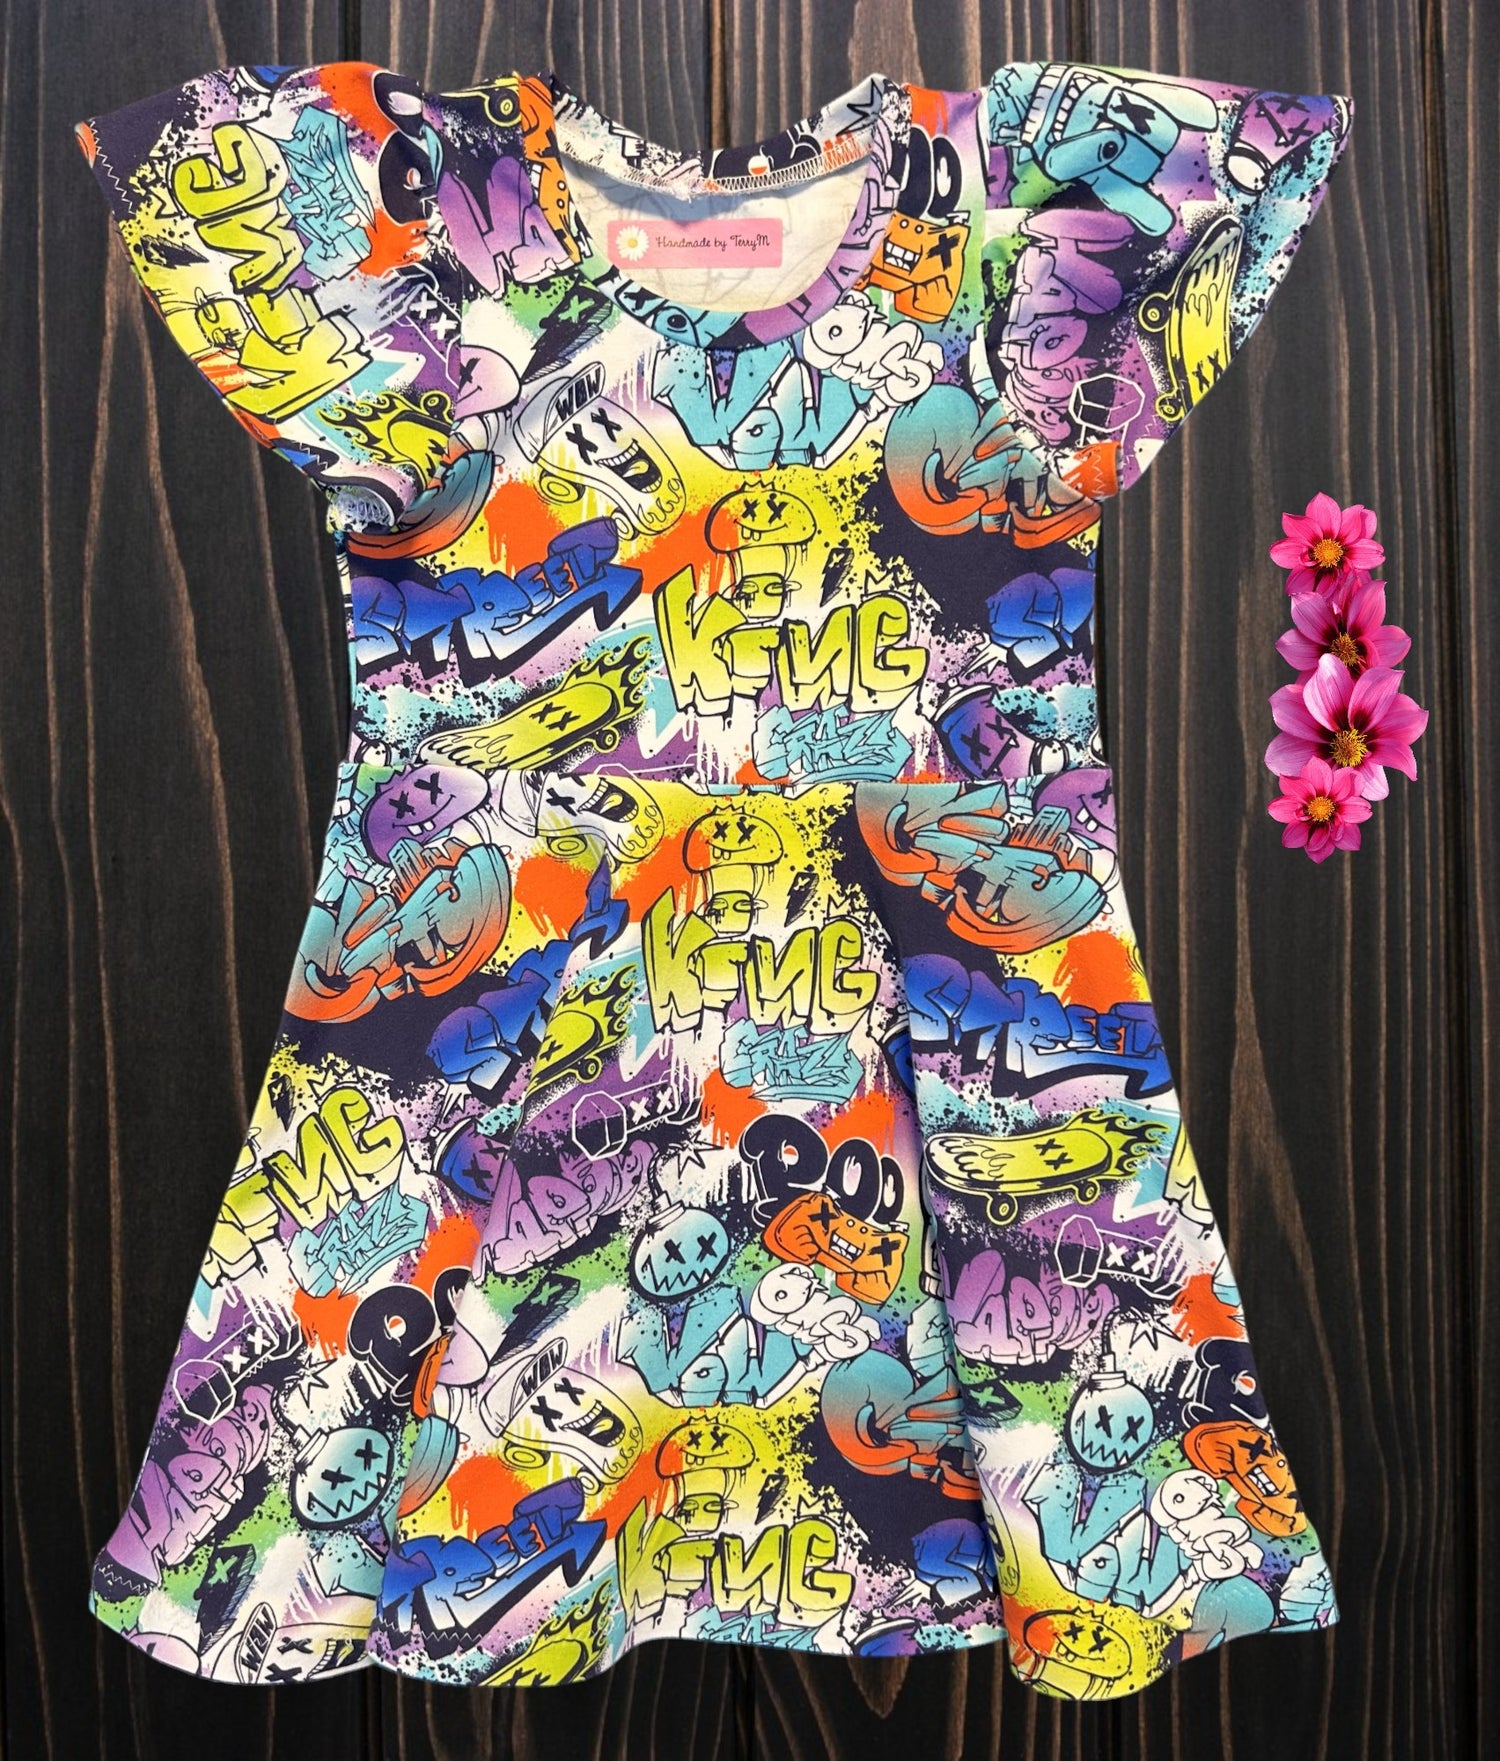 Handmade children's clothes in bright colourful prints. – Handmade By ...